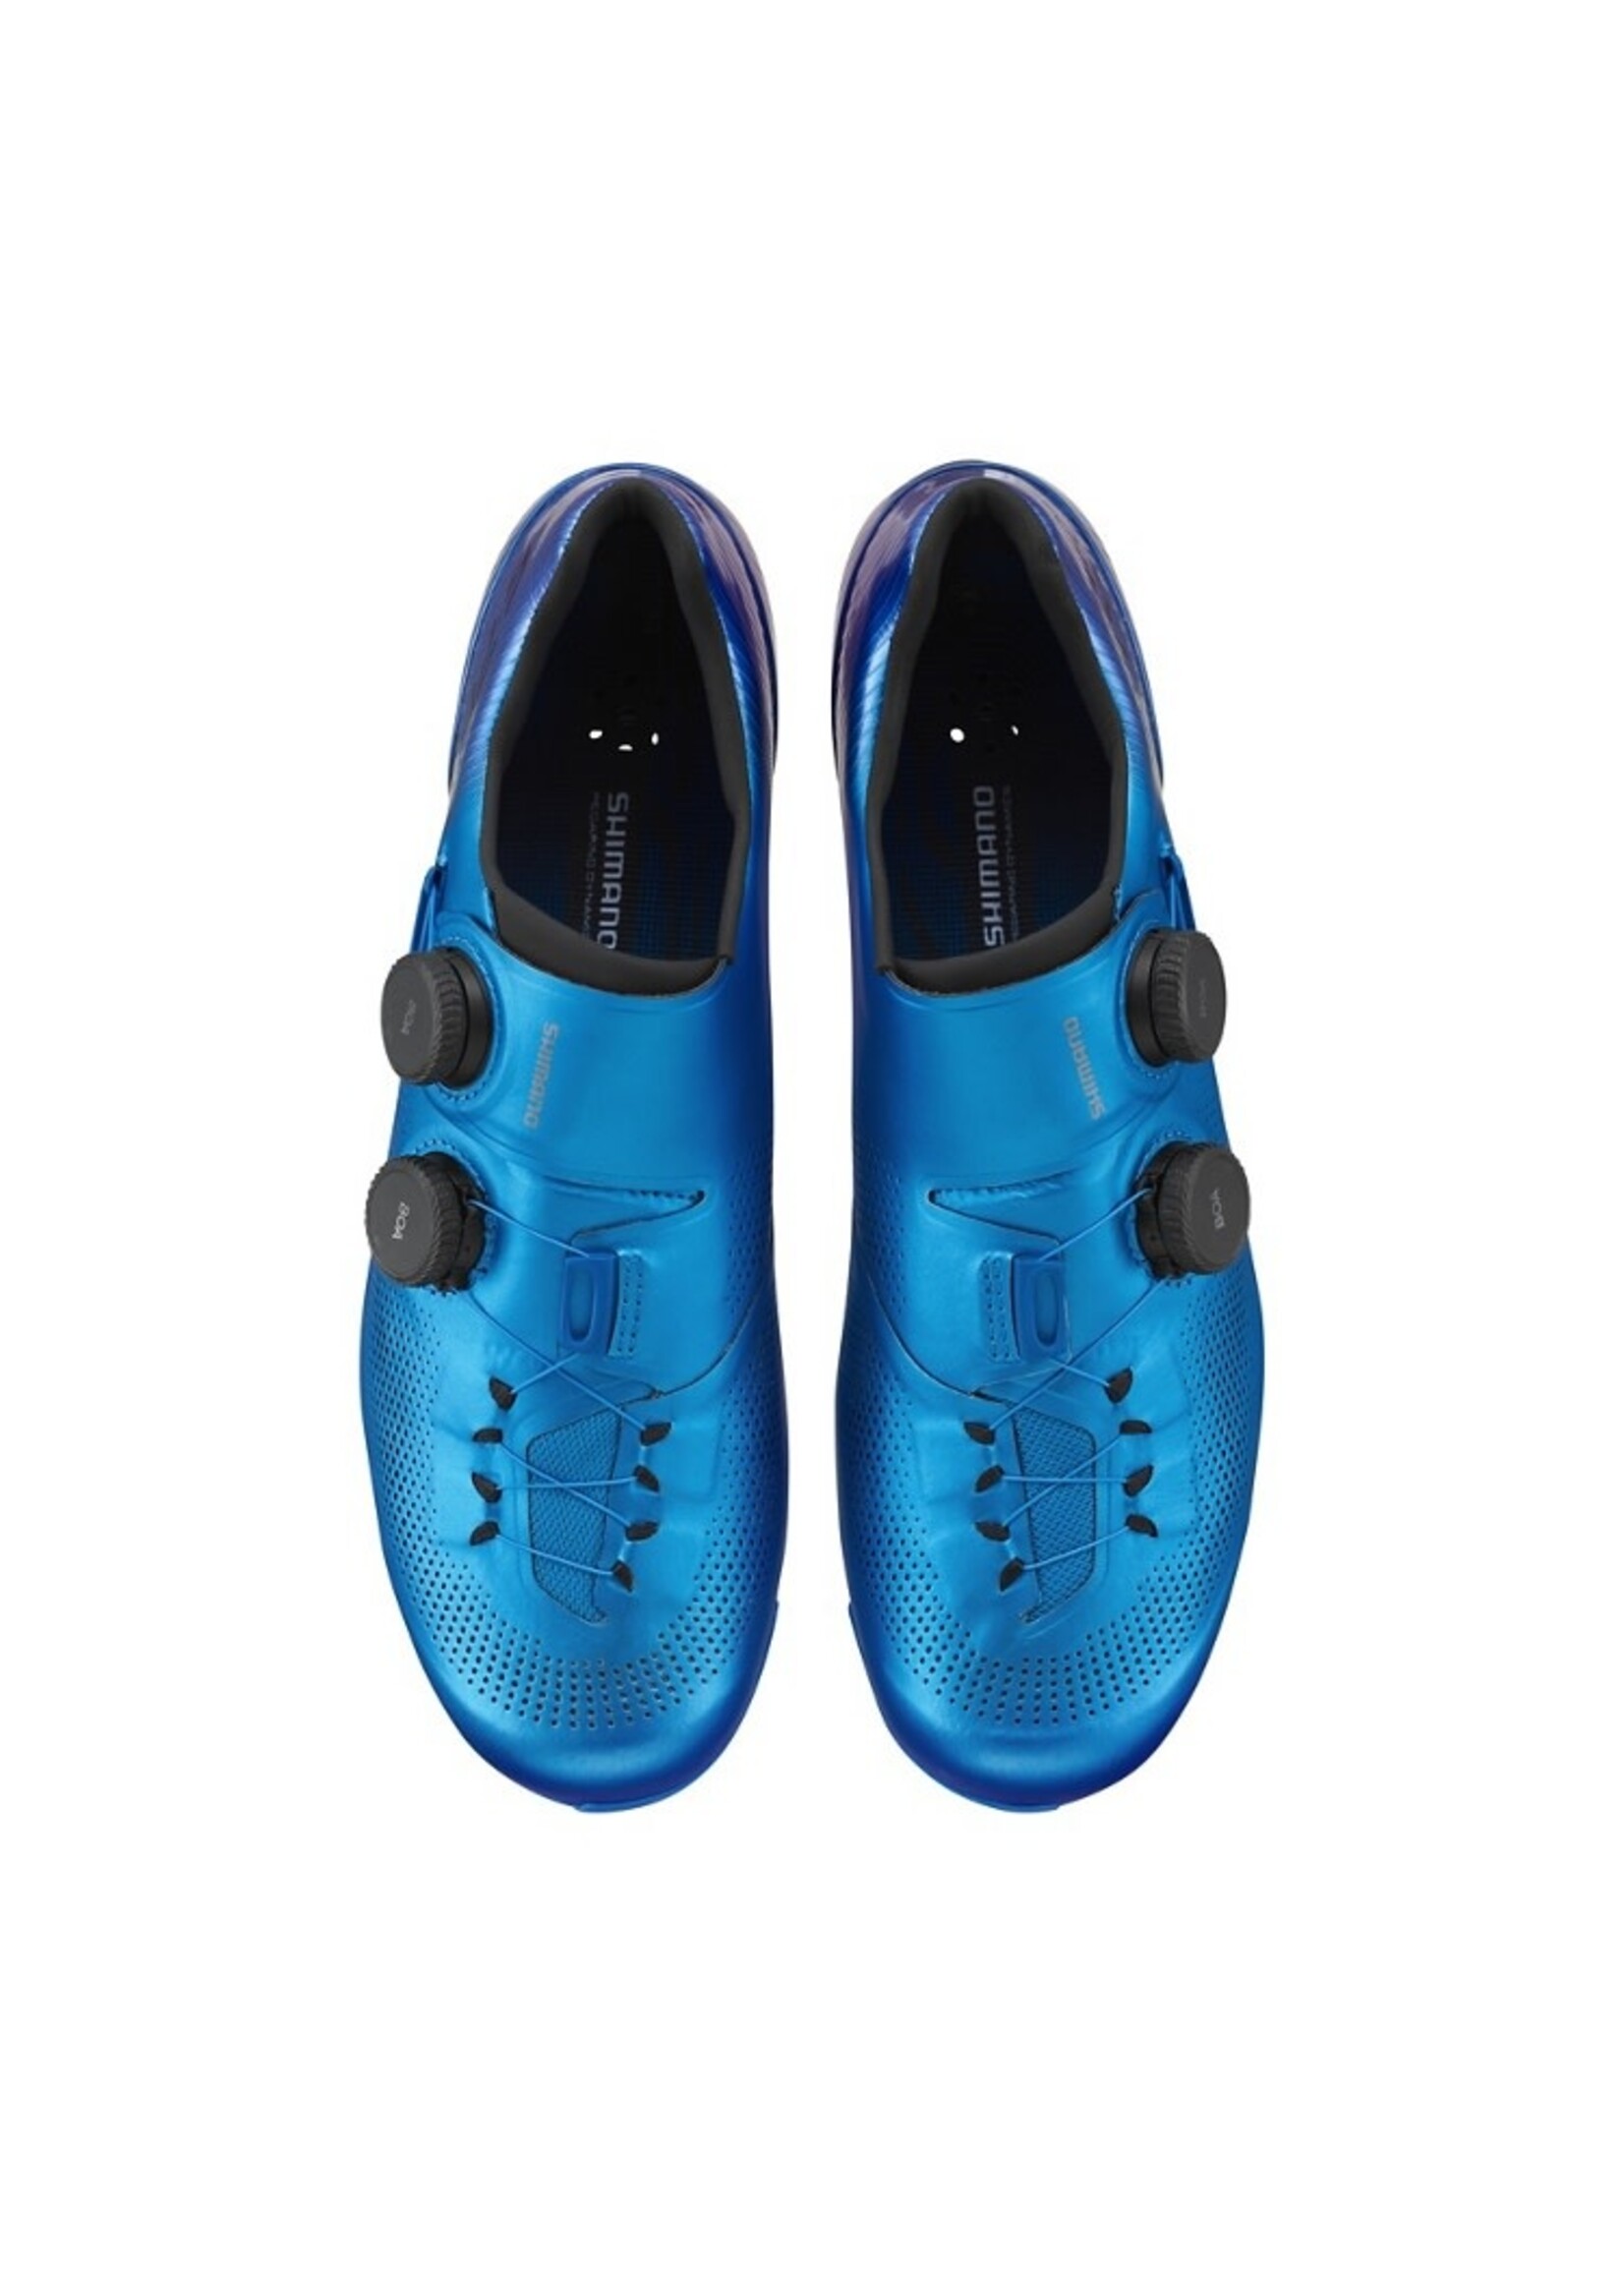 Shimano SH-RC902 S-PHYRE BICYCLE SHOES  BLUE 46.0